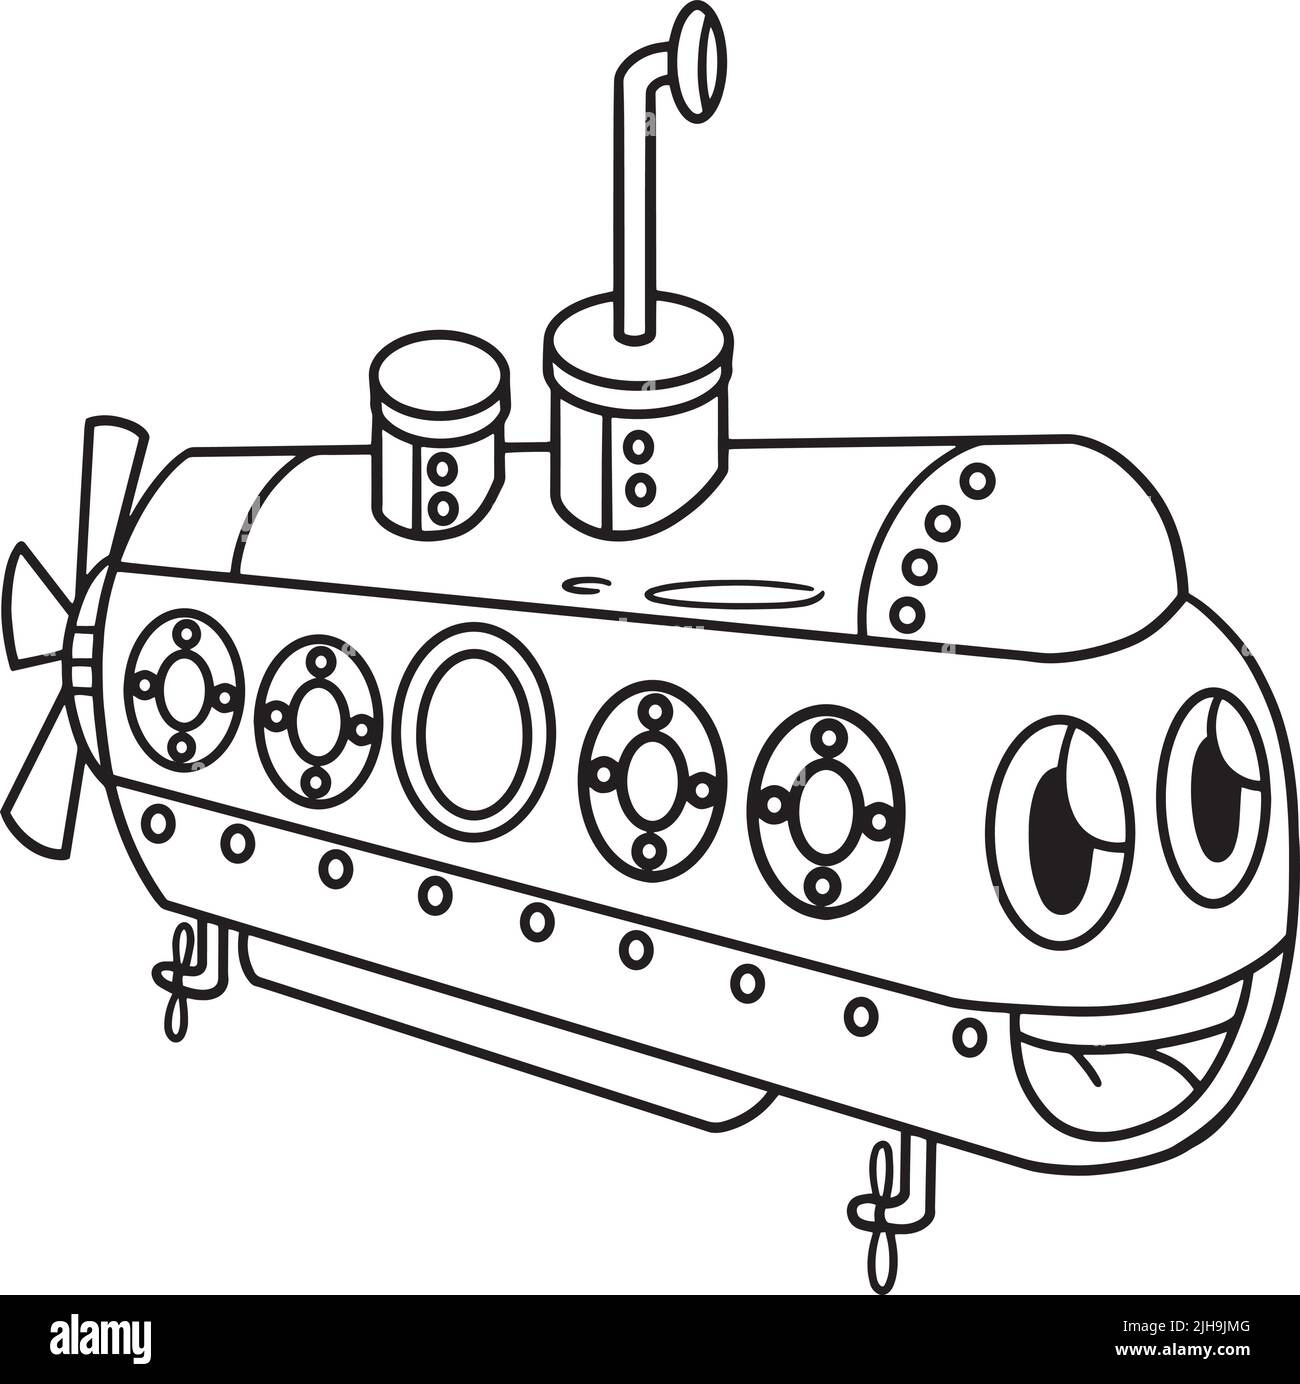 Submarine with Face Vehicle Coloring Page for Kids Stock Vector